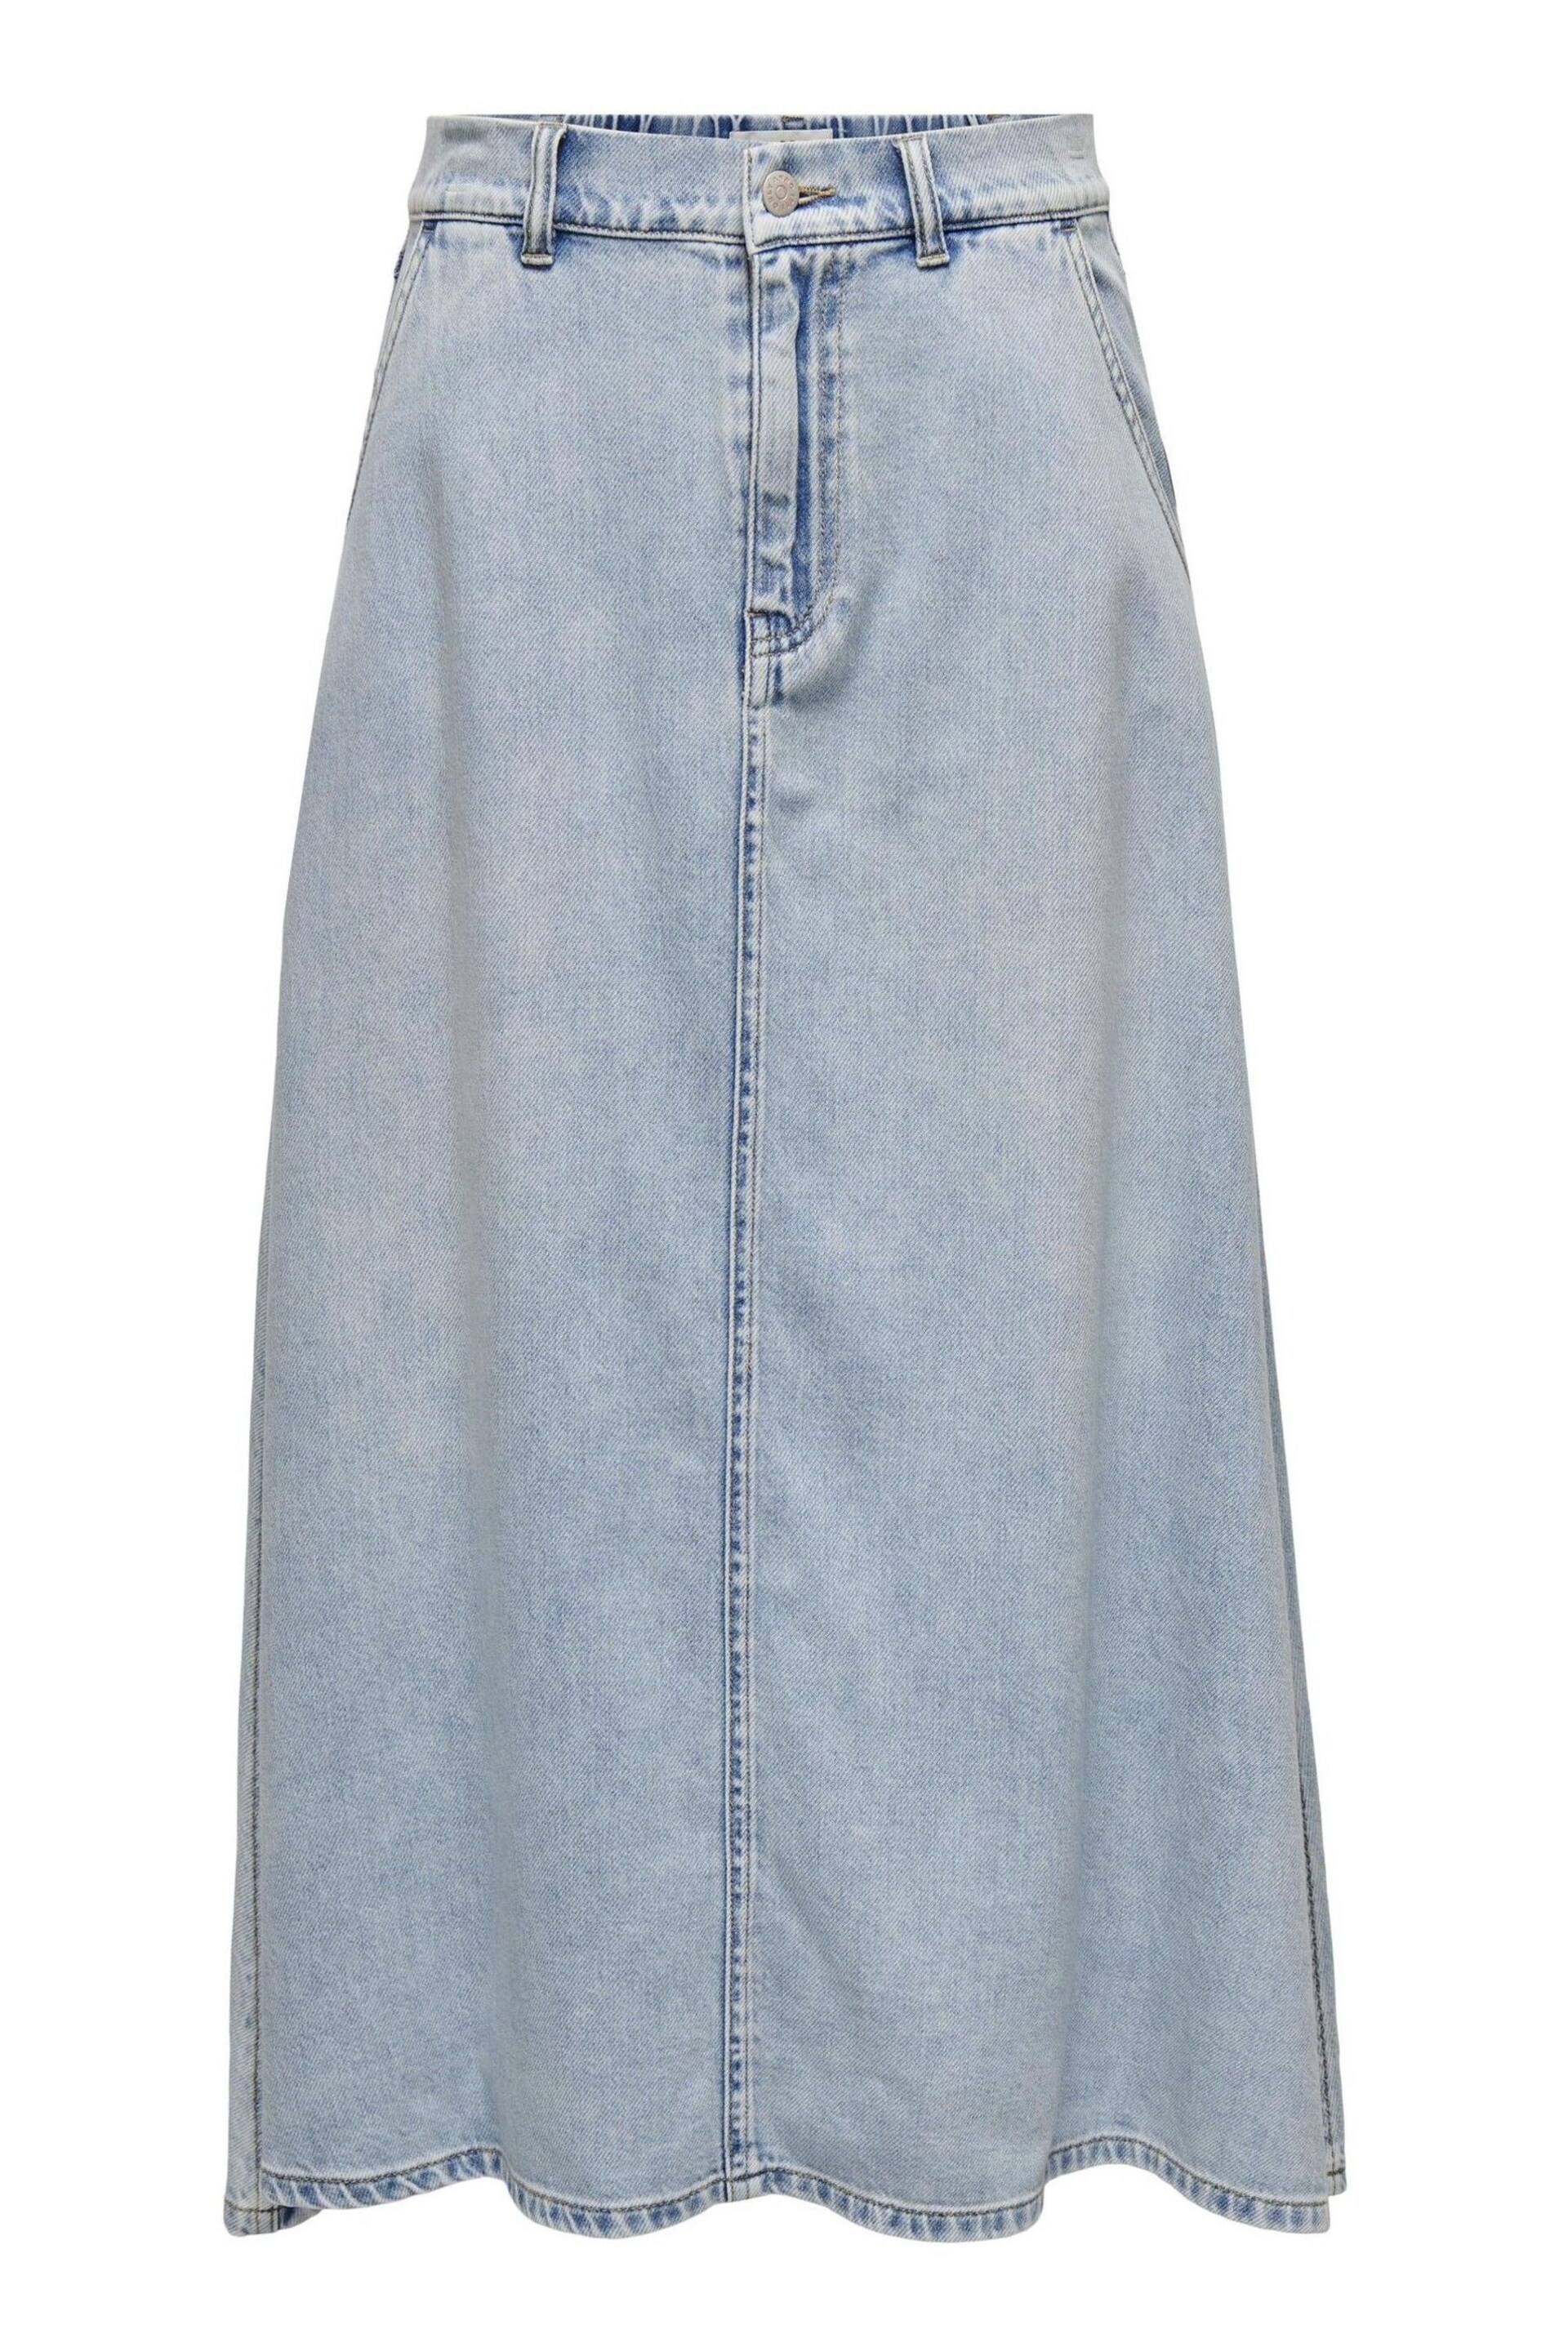 ONLY Blue Relaxed Fit Denim Maxi Skirt - Image 5 of 6